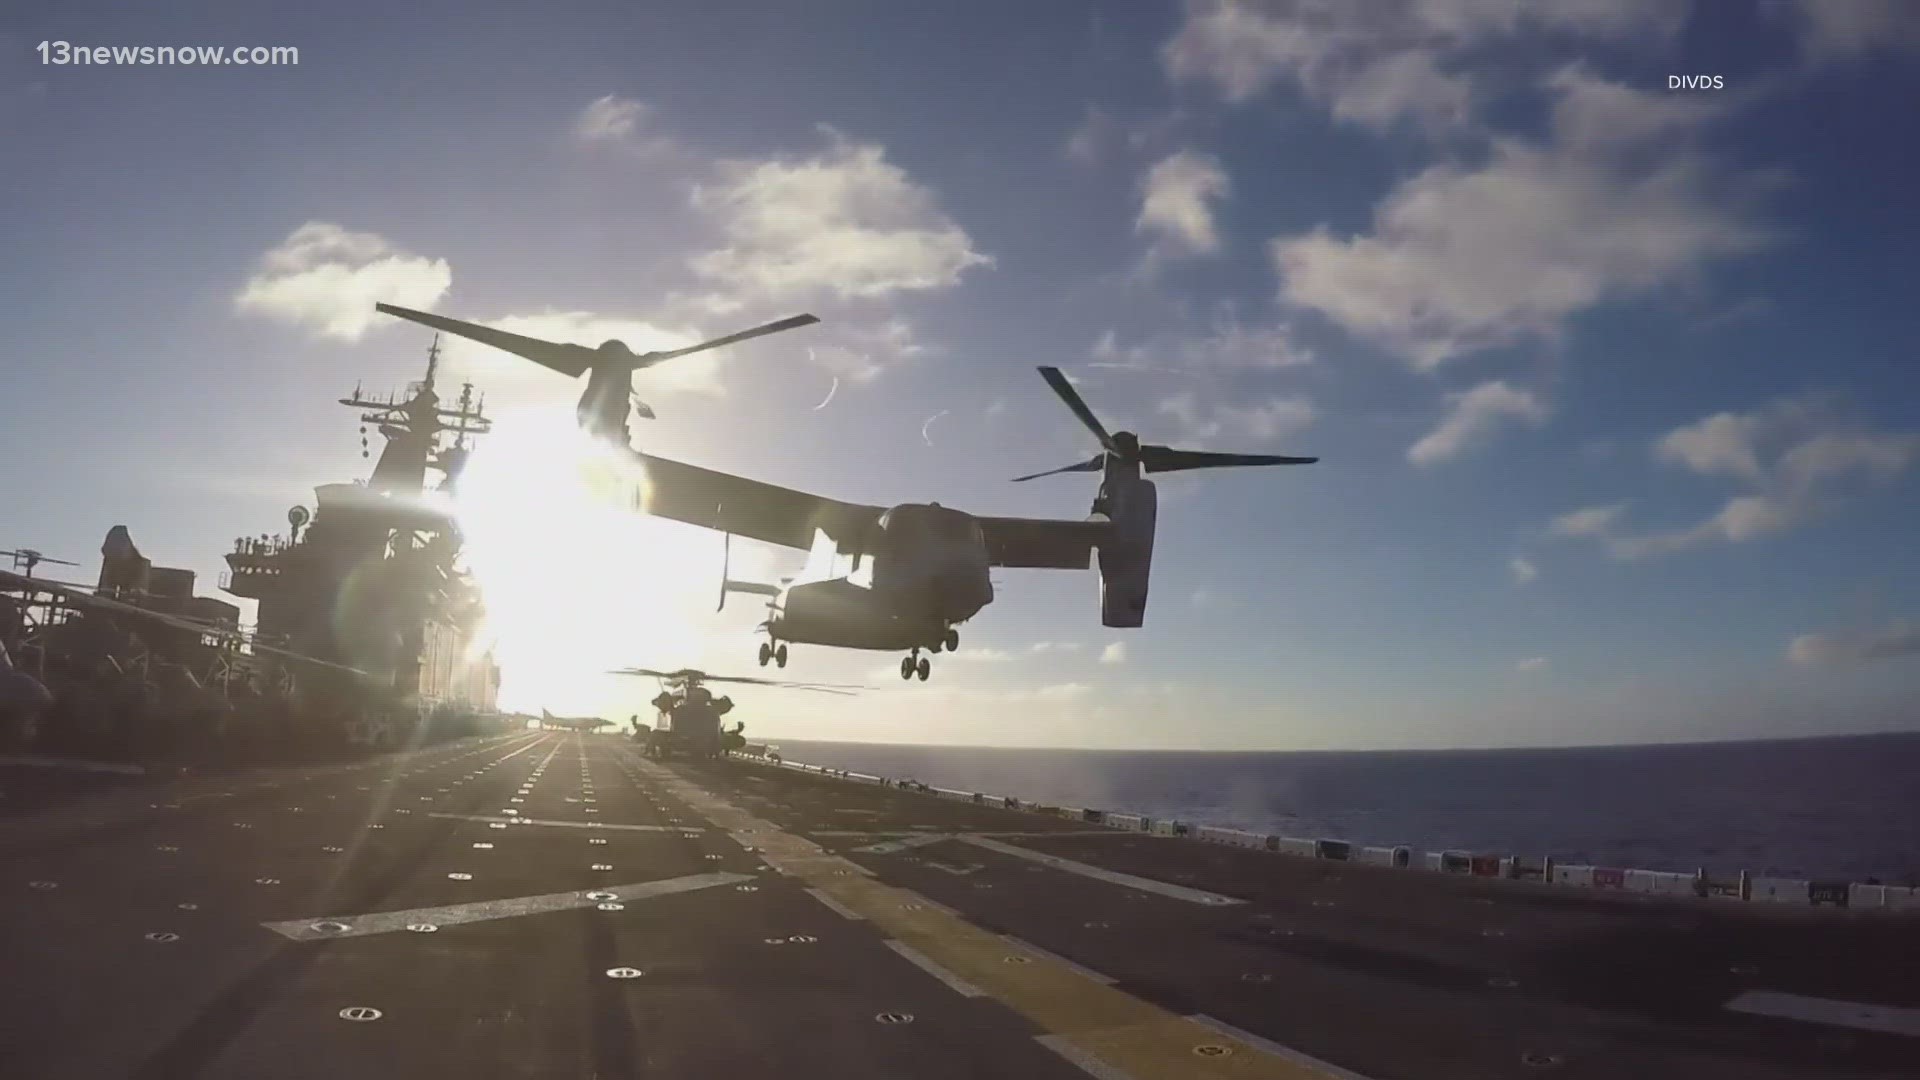 Despite a recent series of fatal crashes involving the military's V-22 Osprey, the Pentagon says it has no plans to ground the aircraft... at least, not yet.